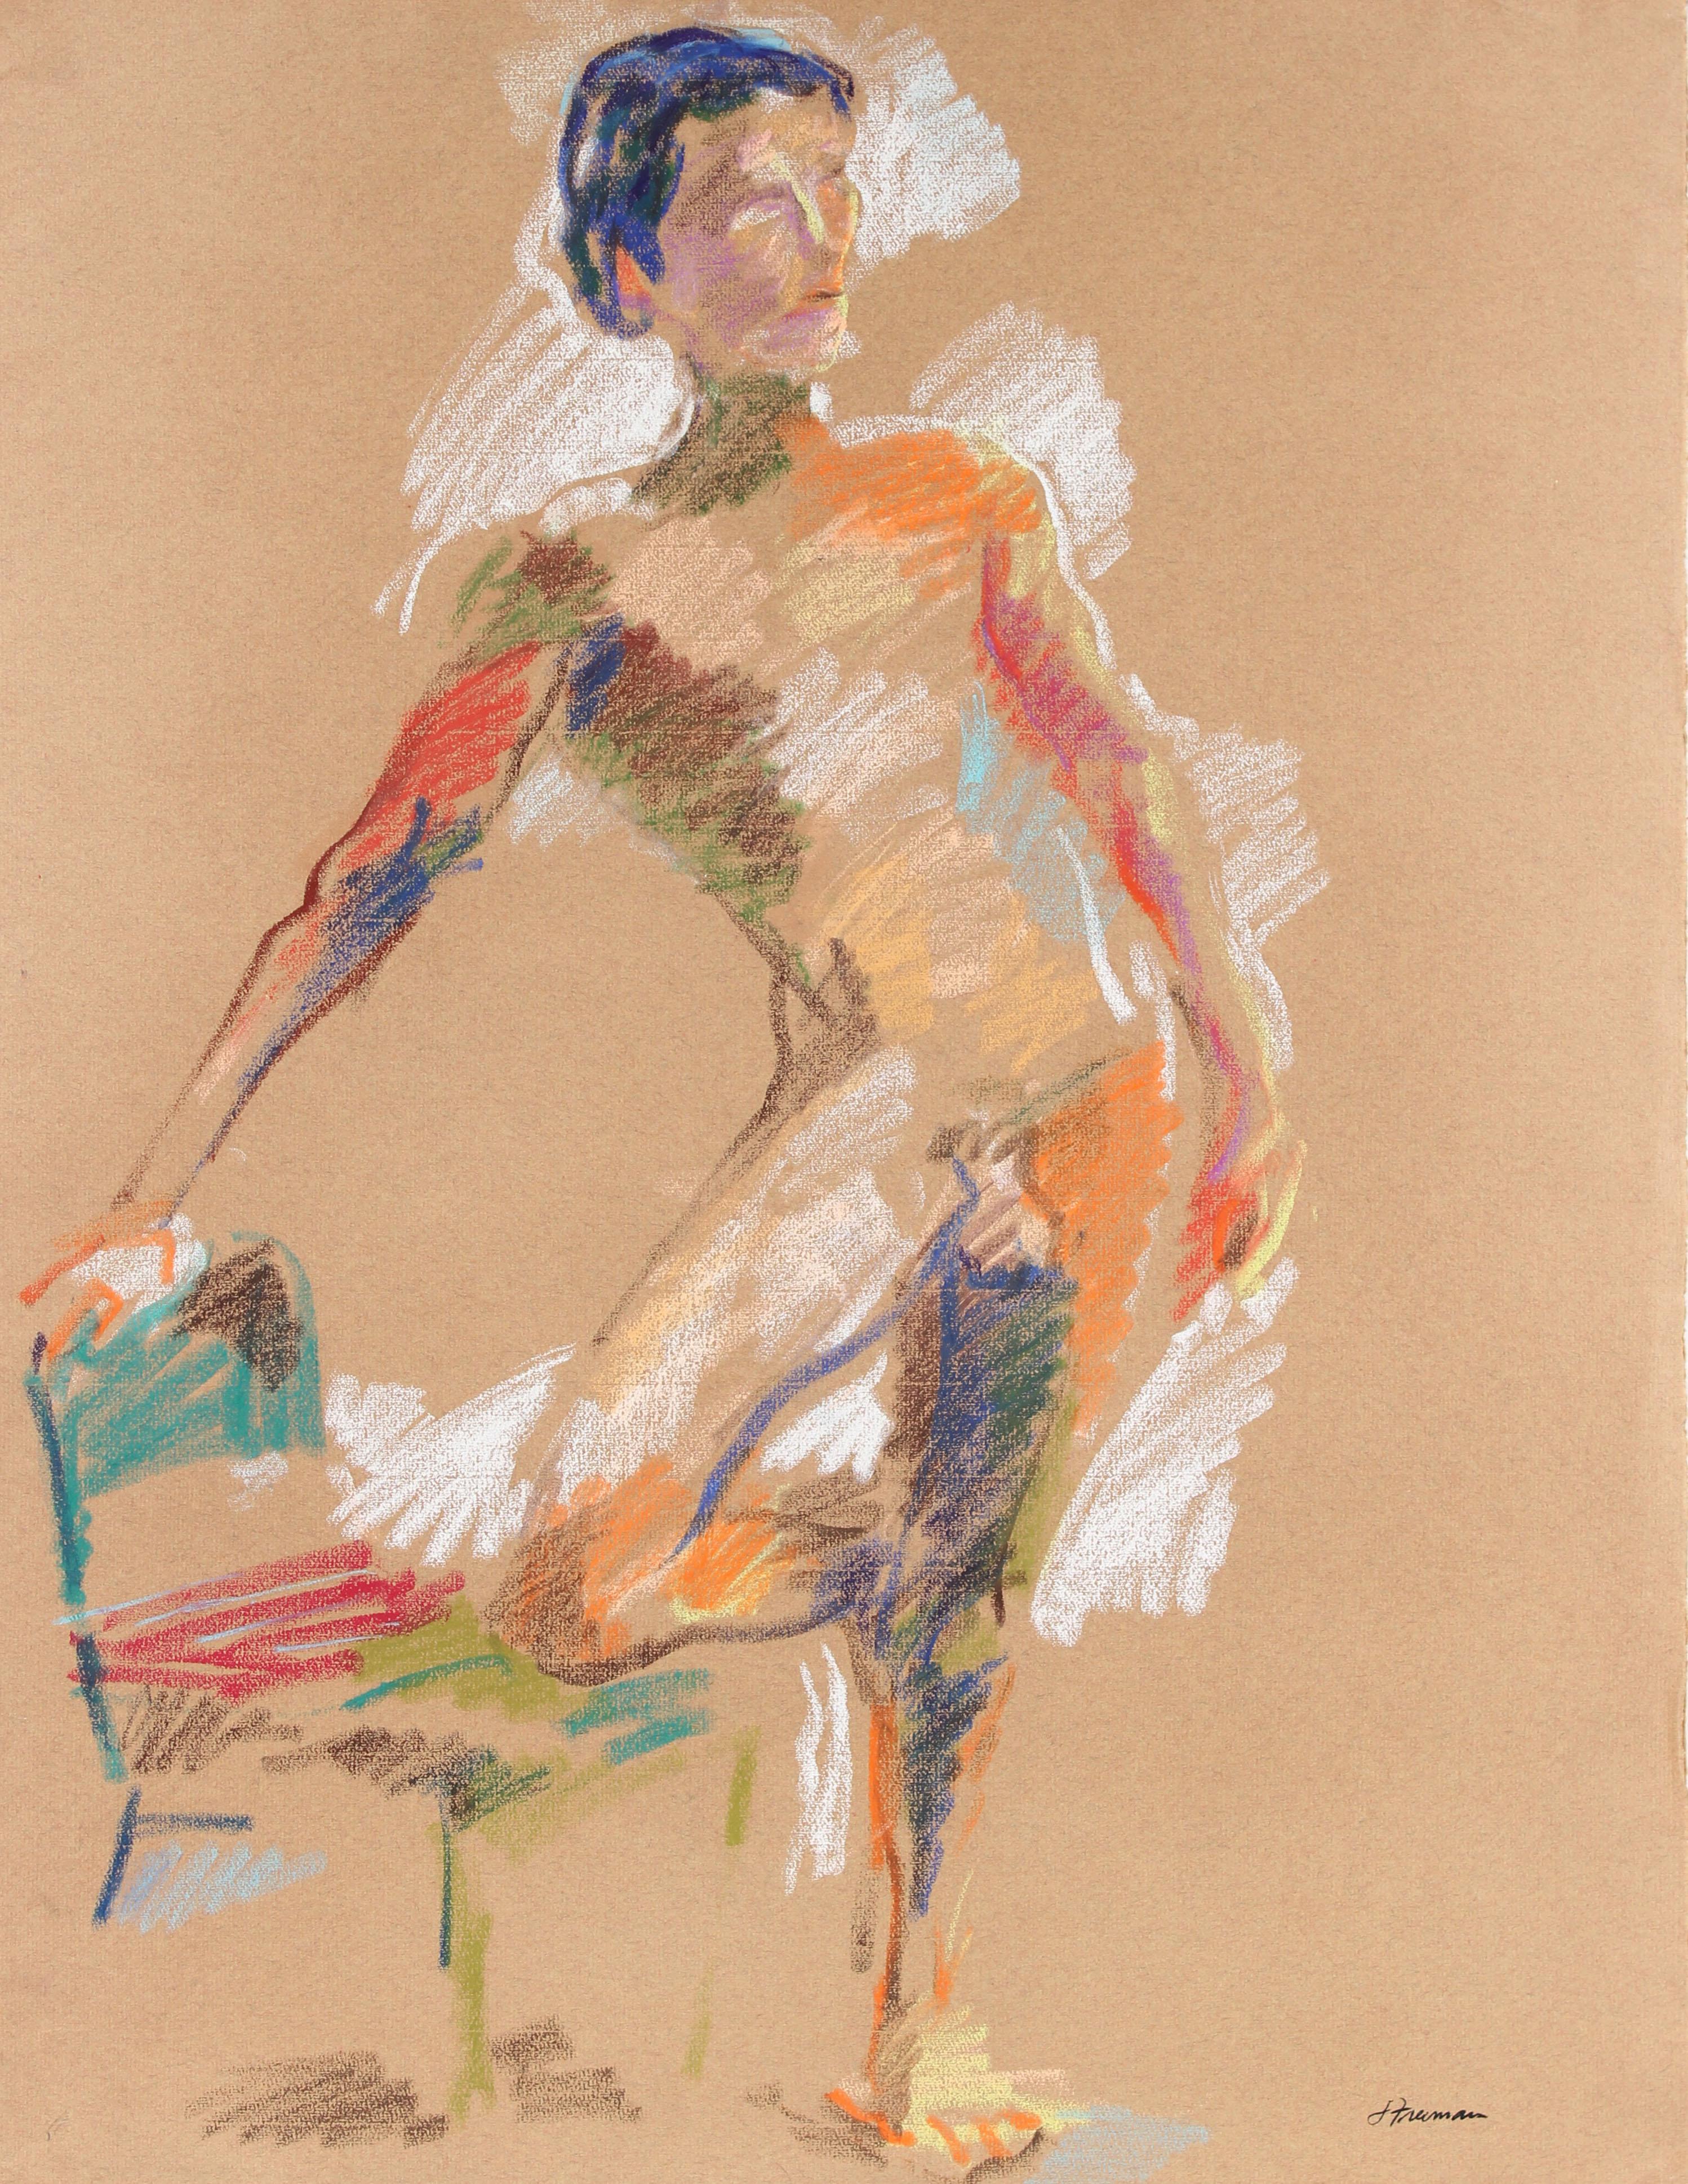 Jack Freeman Figurative Art – Colorful Abstract Figure Drawing in Pastel on Paper, September 23, 1983